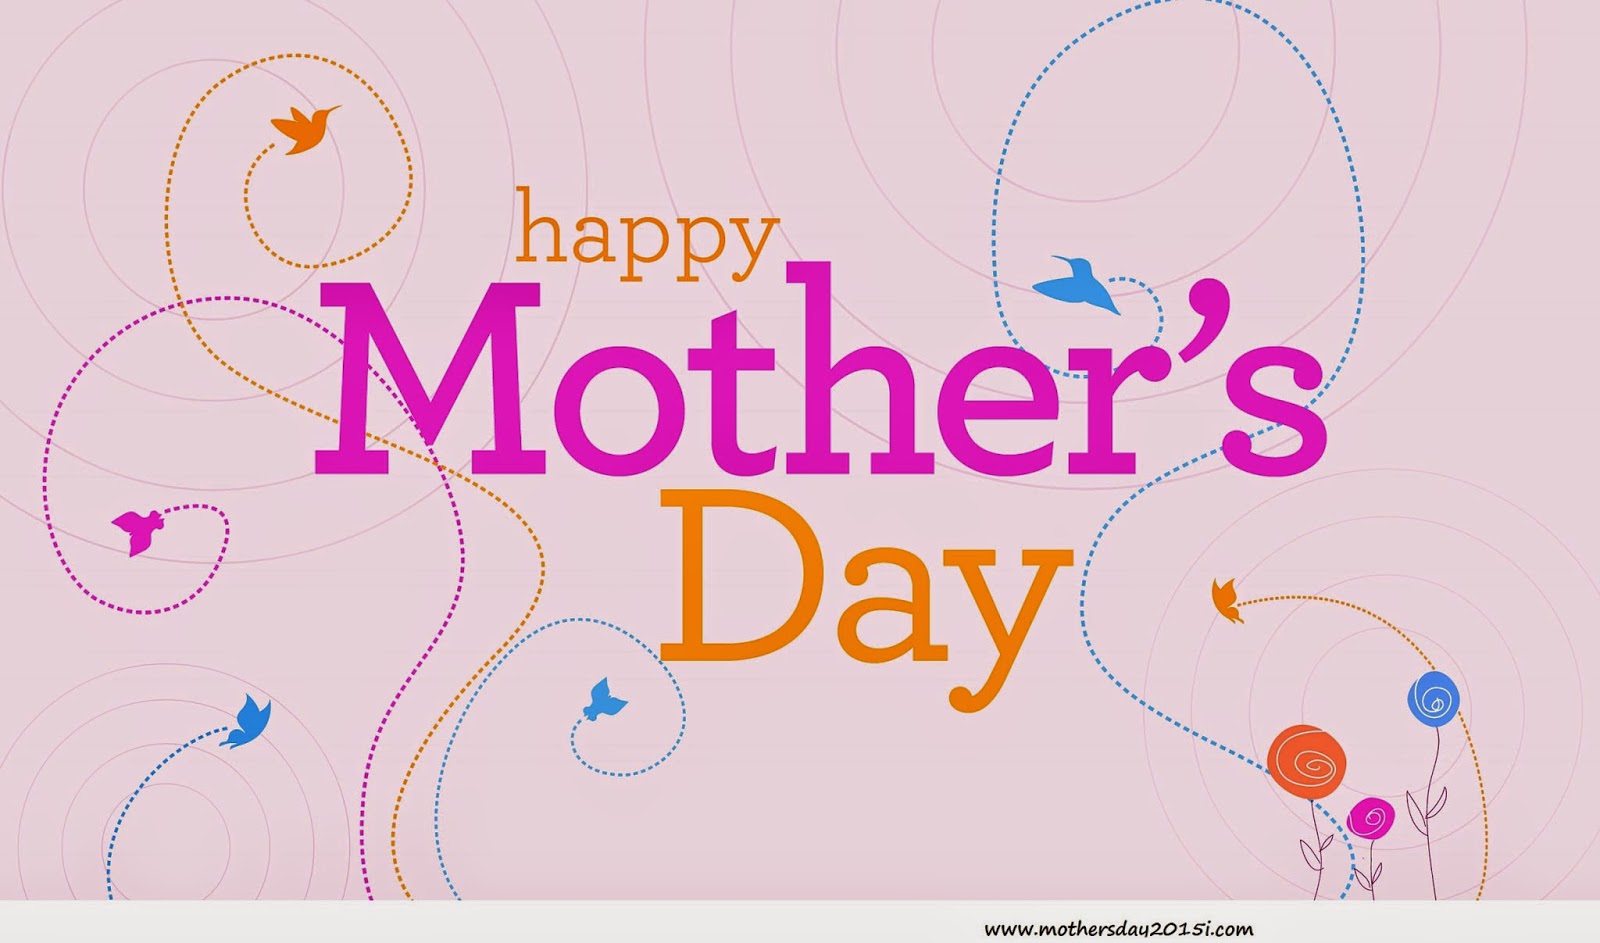 Mothers Day Cards | Happy MOTHERS DAY 2015